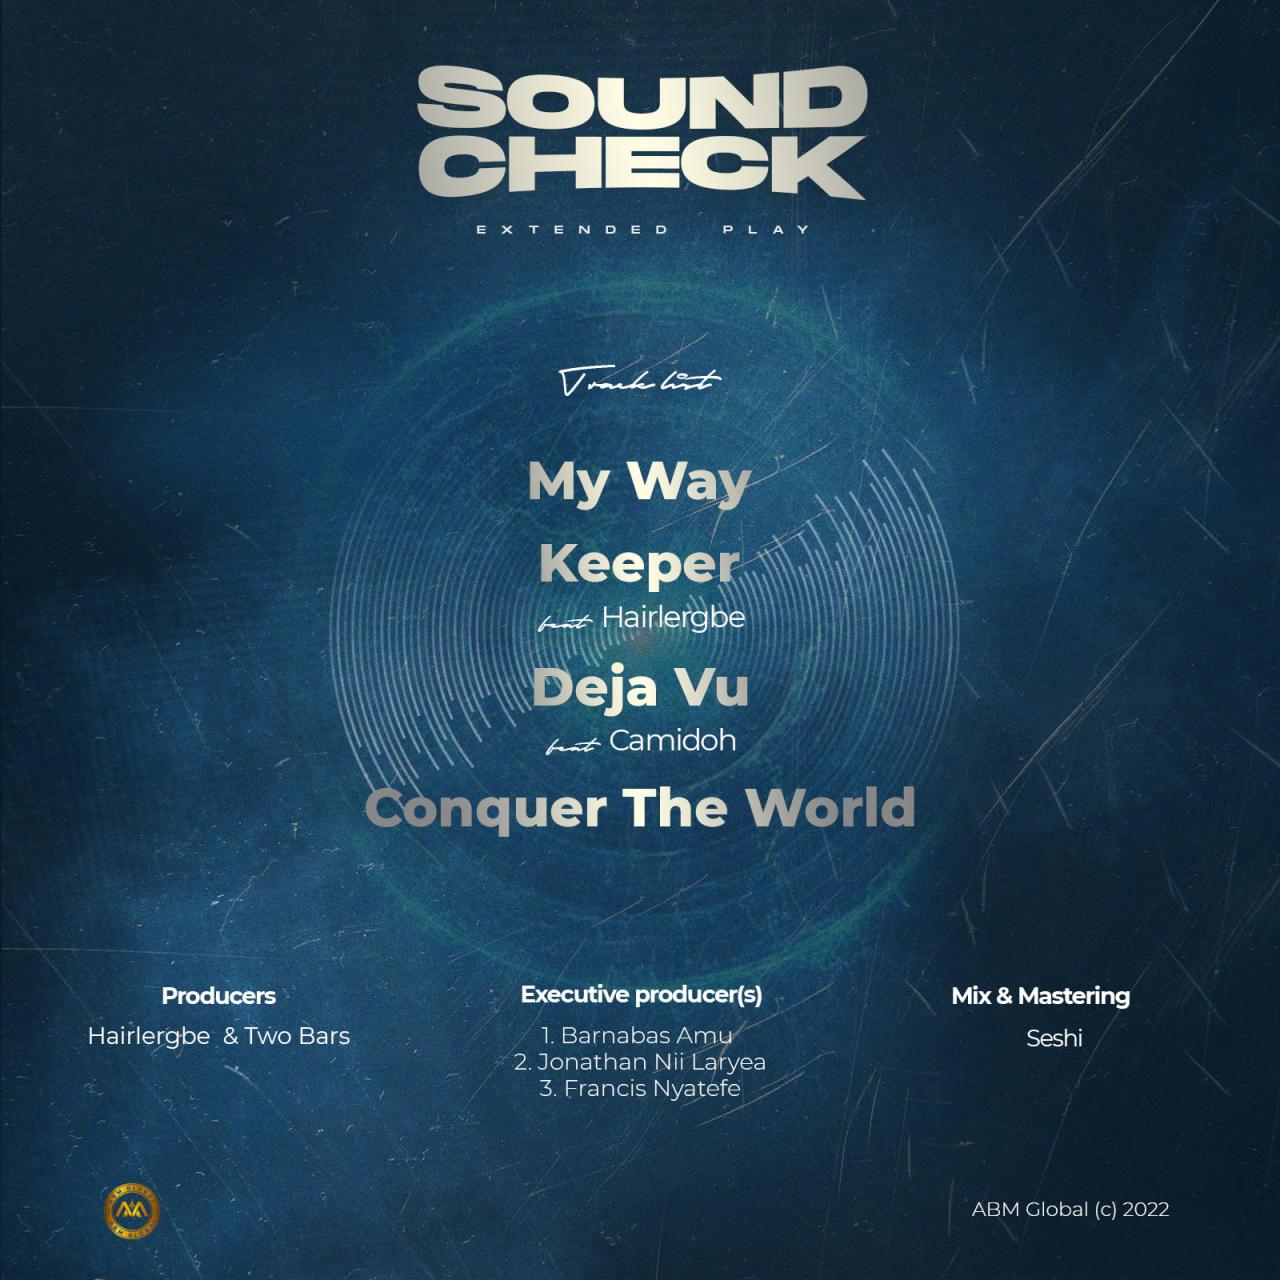 Keeny Ice Drops "Sound Check" Ep, Featuring Camidoh